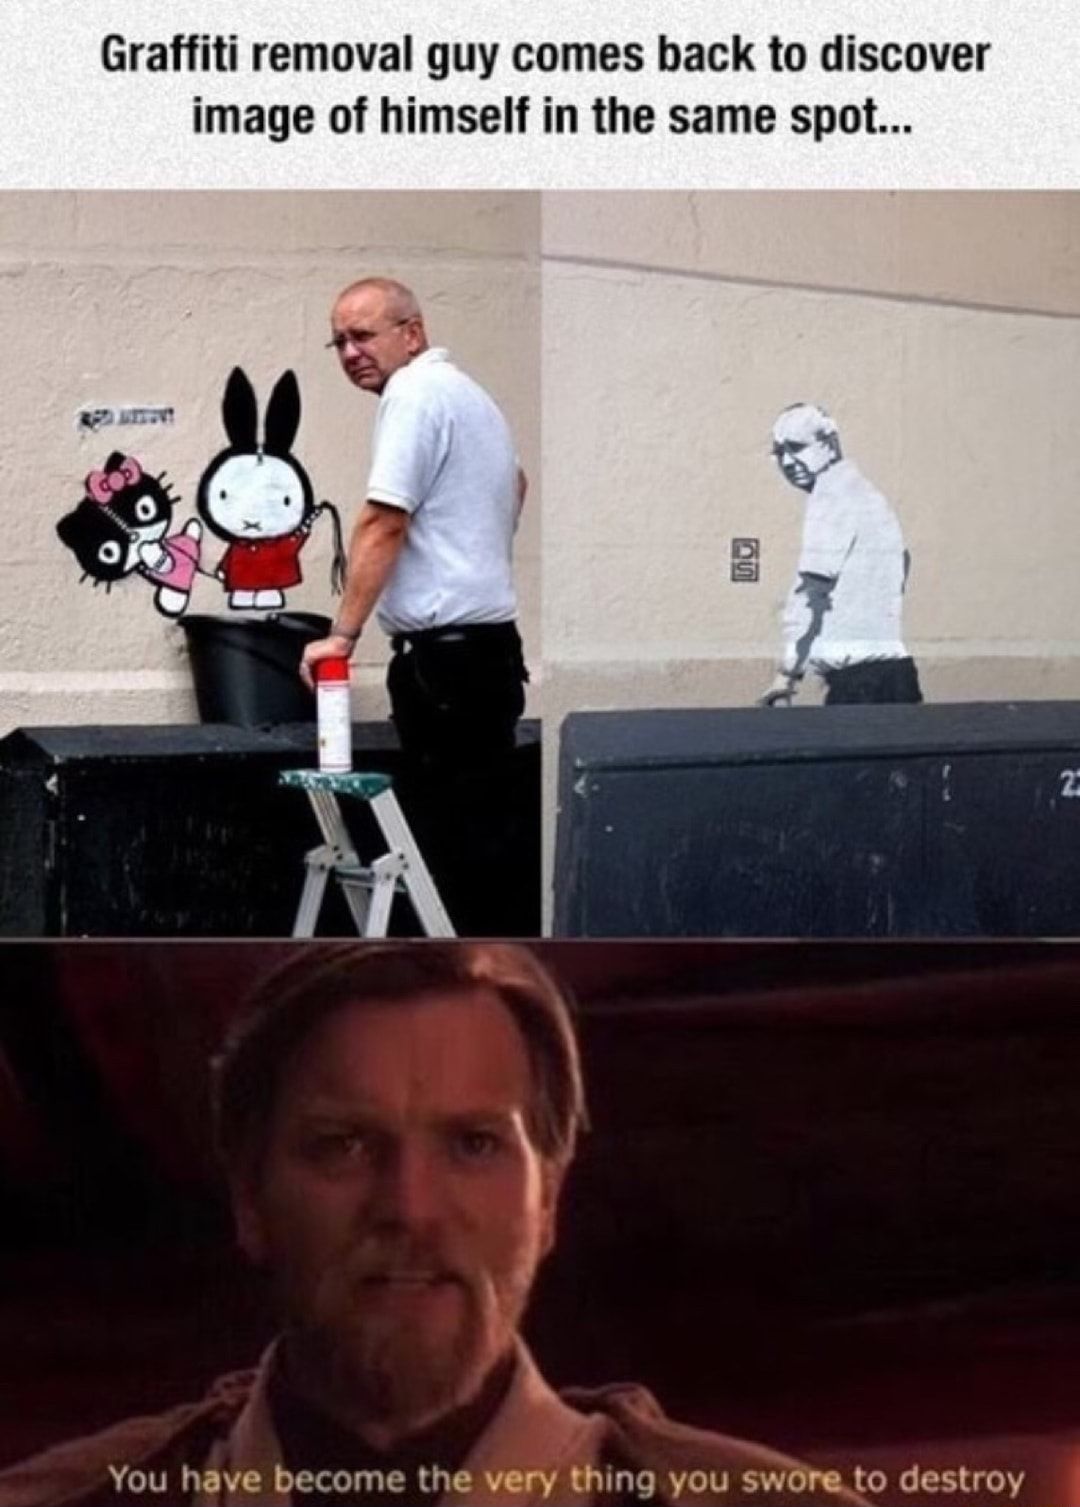 graffiti removal guy comes back to discover - Graffiti removal guy comes back to discover image of himself in the same spot... You have become the very thing you swore to destroy